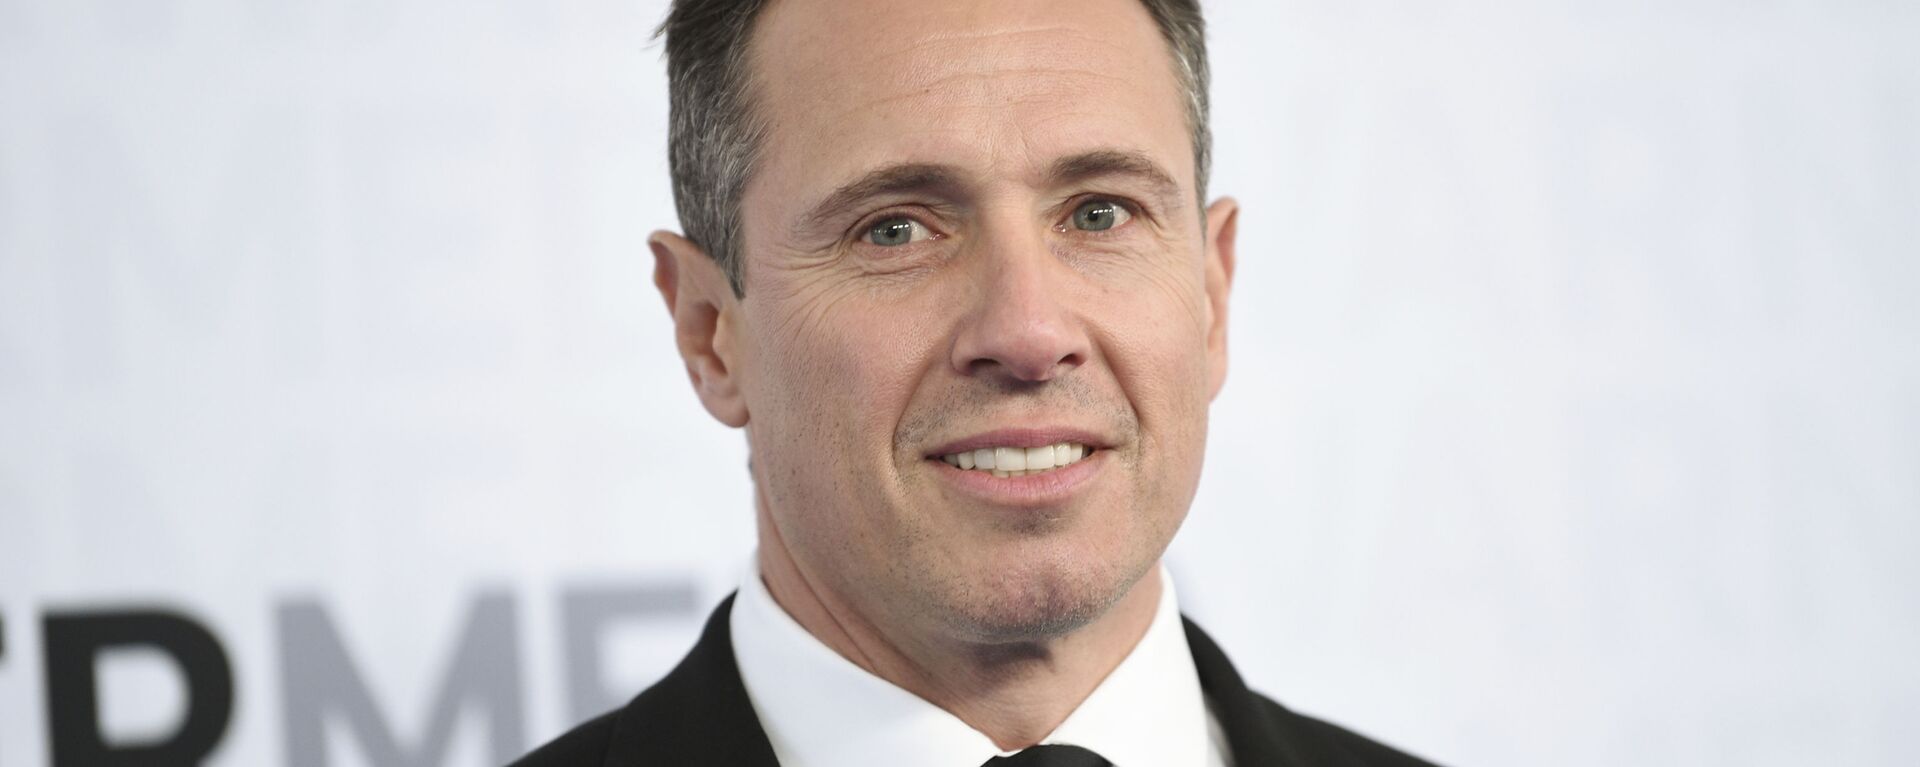 CNN news anchor Chris Cuomo attends the WarnerMedia Upfront at Madison Square Garden on 15 May 2019, in New York. - Sputnik International, 1920, 04.08.2021